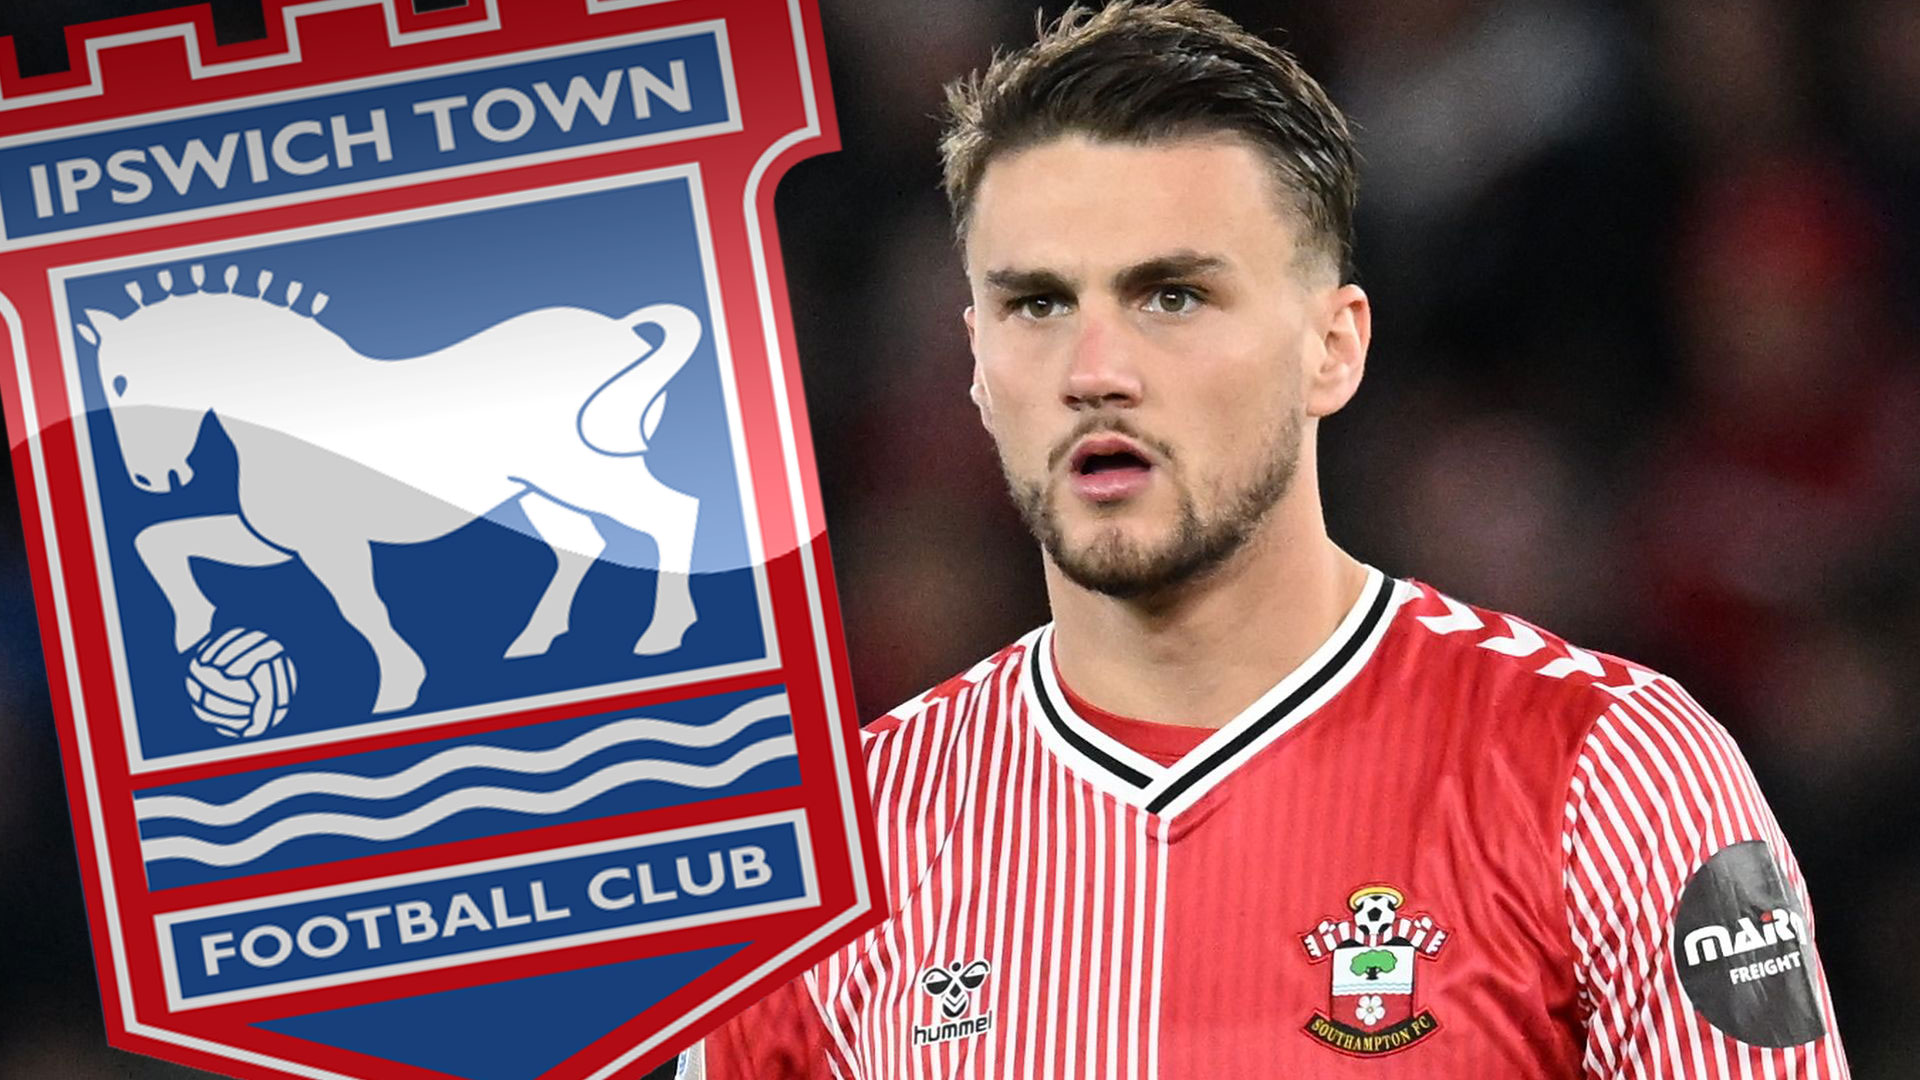 Exclusive: Ipswich Secures £15m Transfer Deal with Man City Star After Dominating Promotion Rival